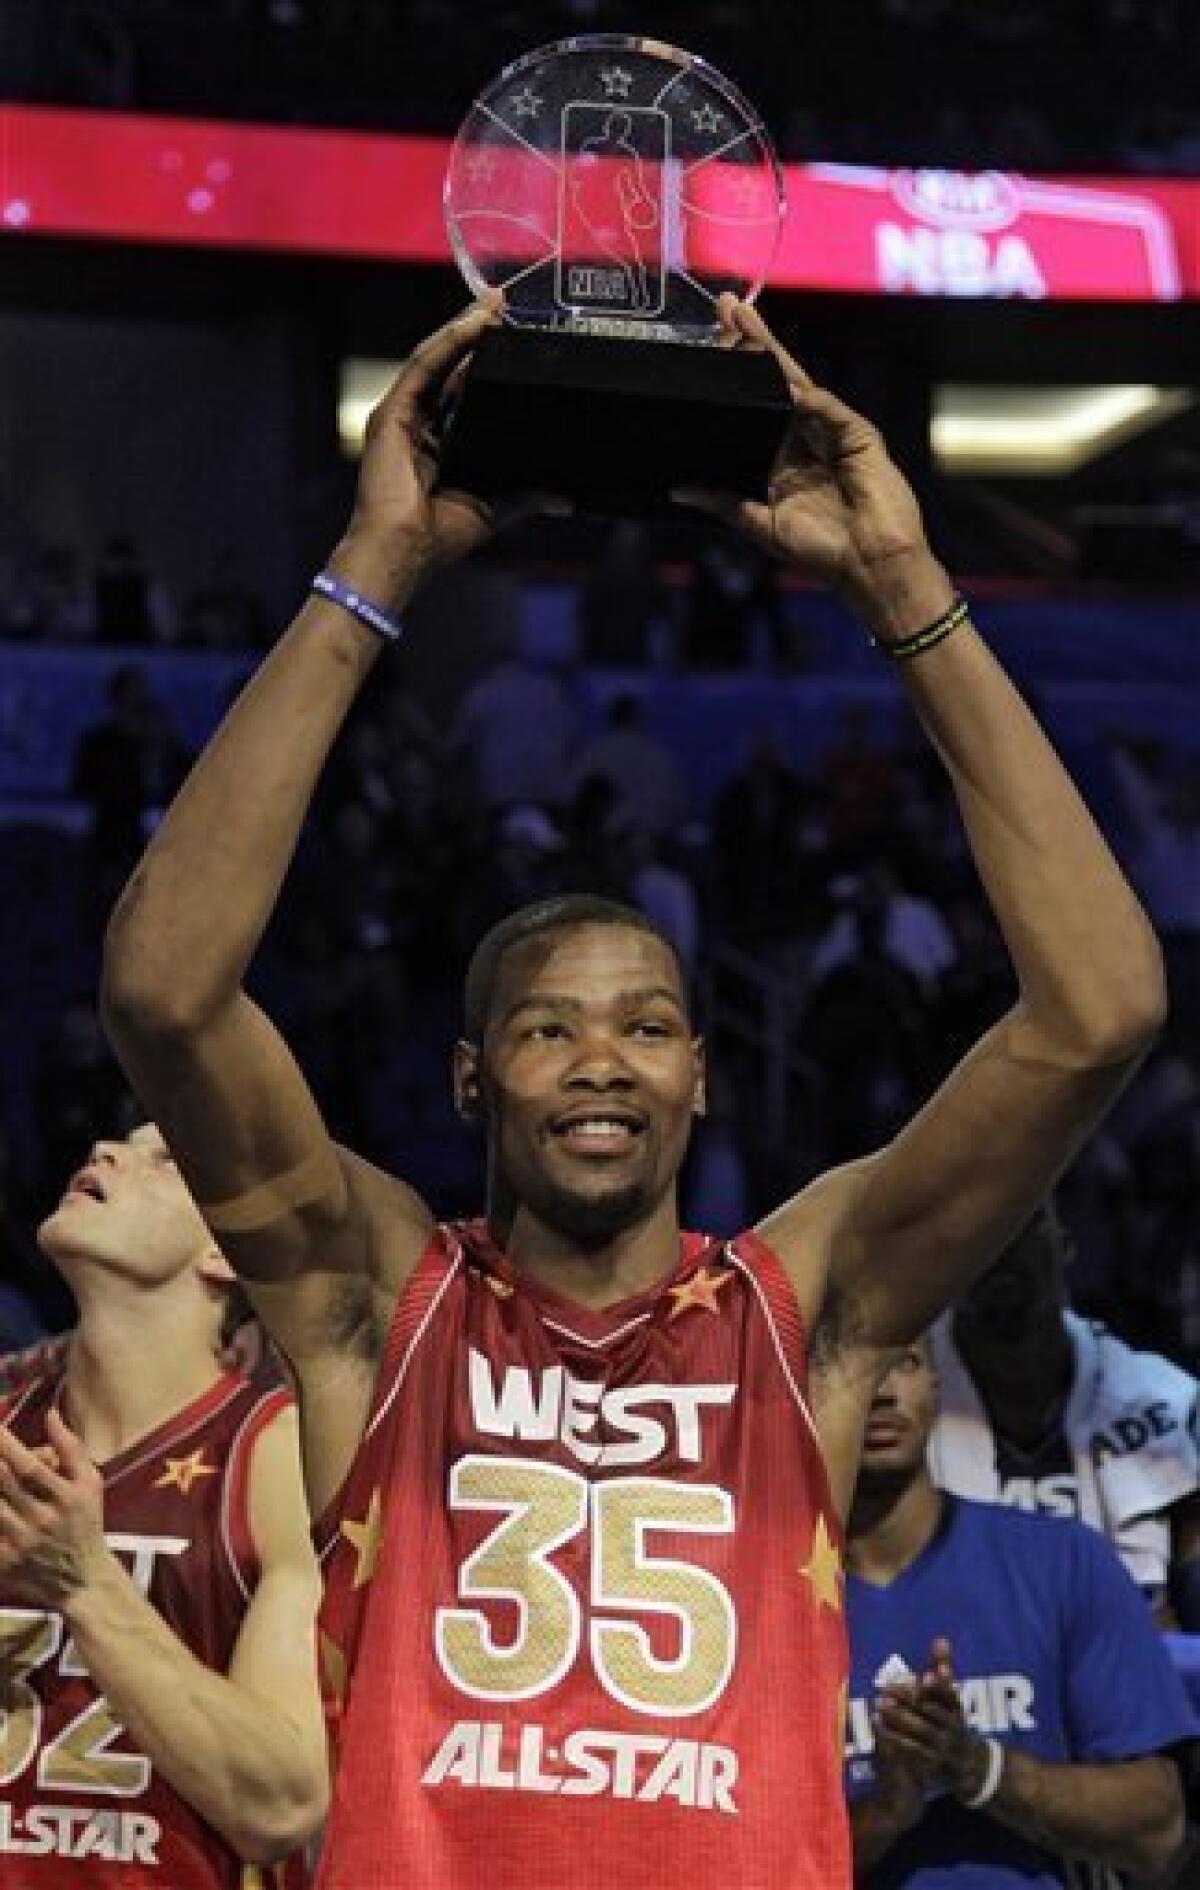 Thunder's Kevin Durant wins first NBA Most Valuable Player award